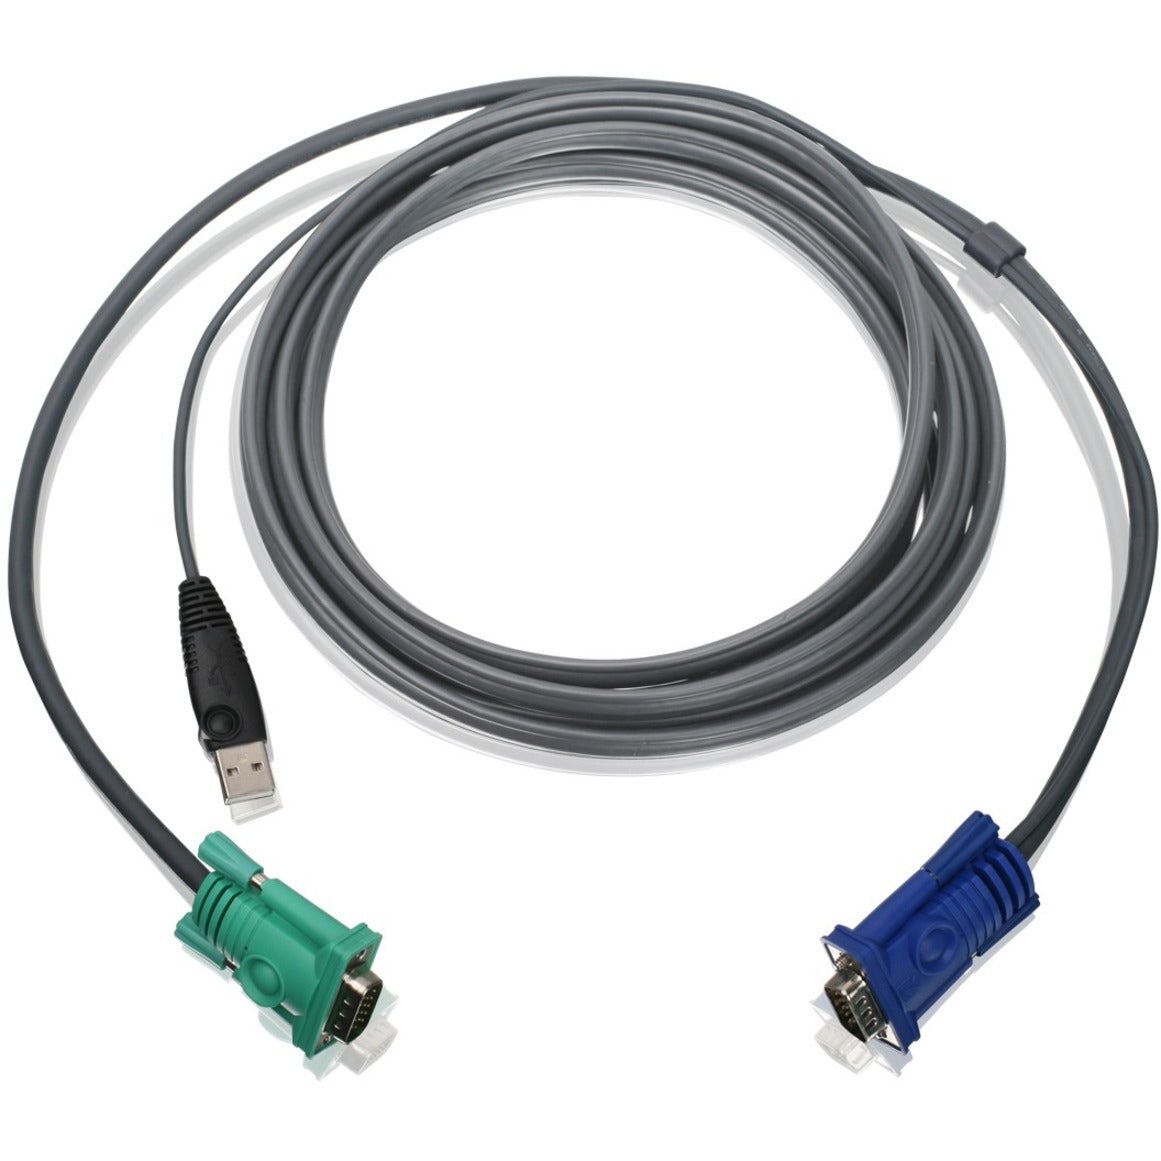 IOGEAR G2L5203UTAA USB KVM Cable 10 Ft, Copper Conductor, TAA Compliant, RoHS and WEEE Certified